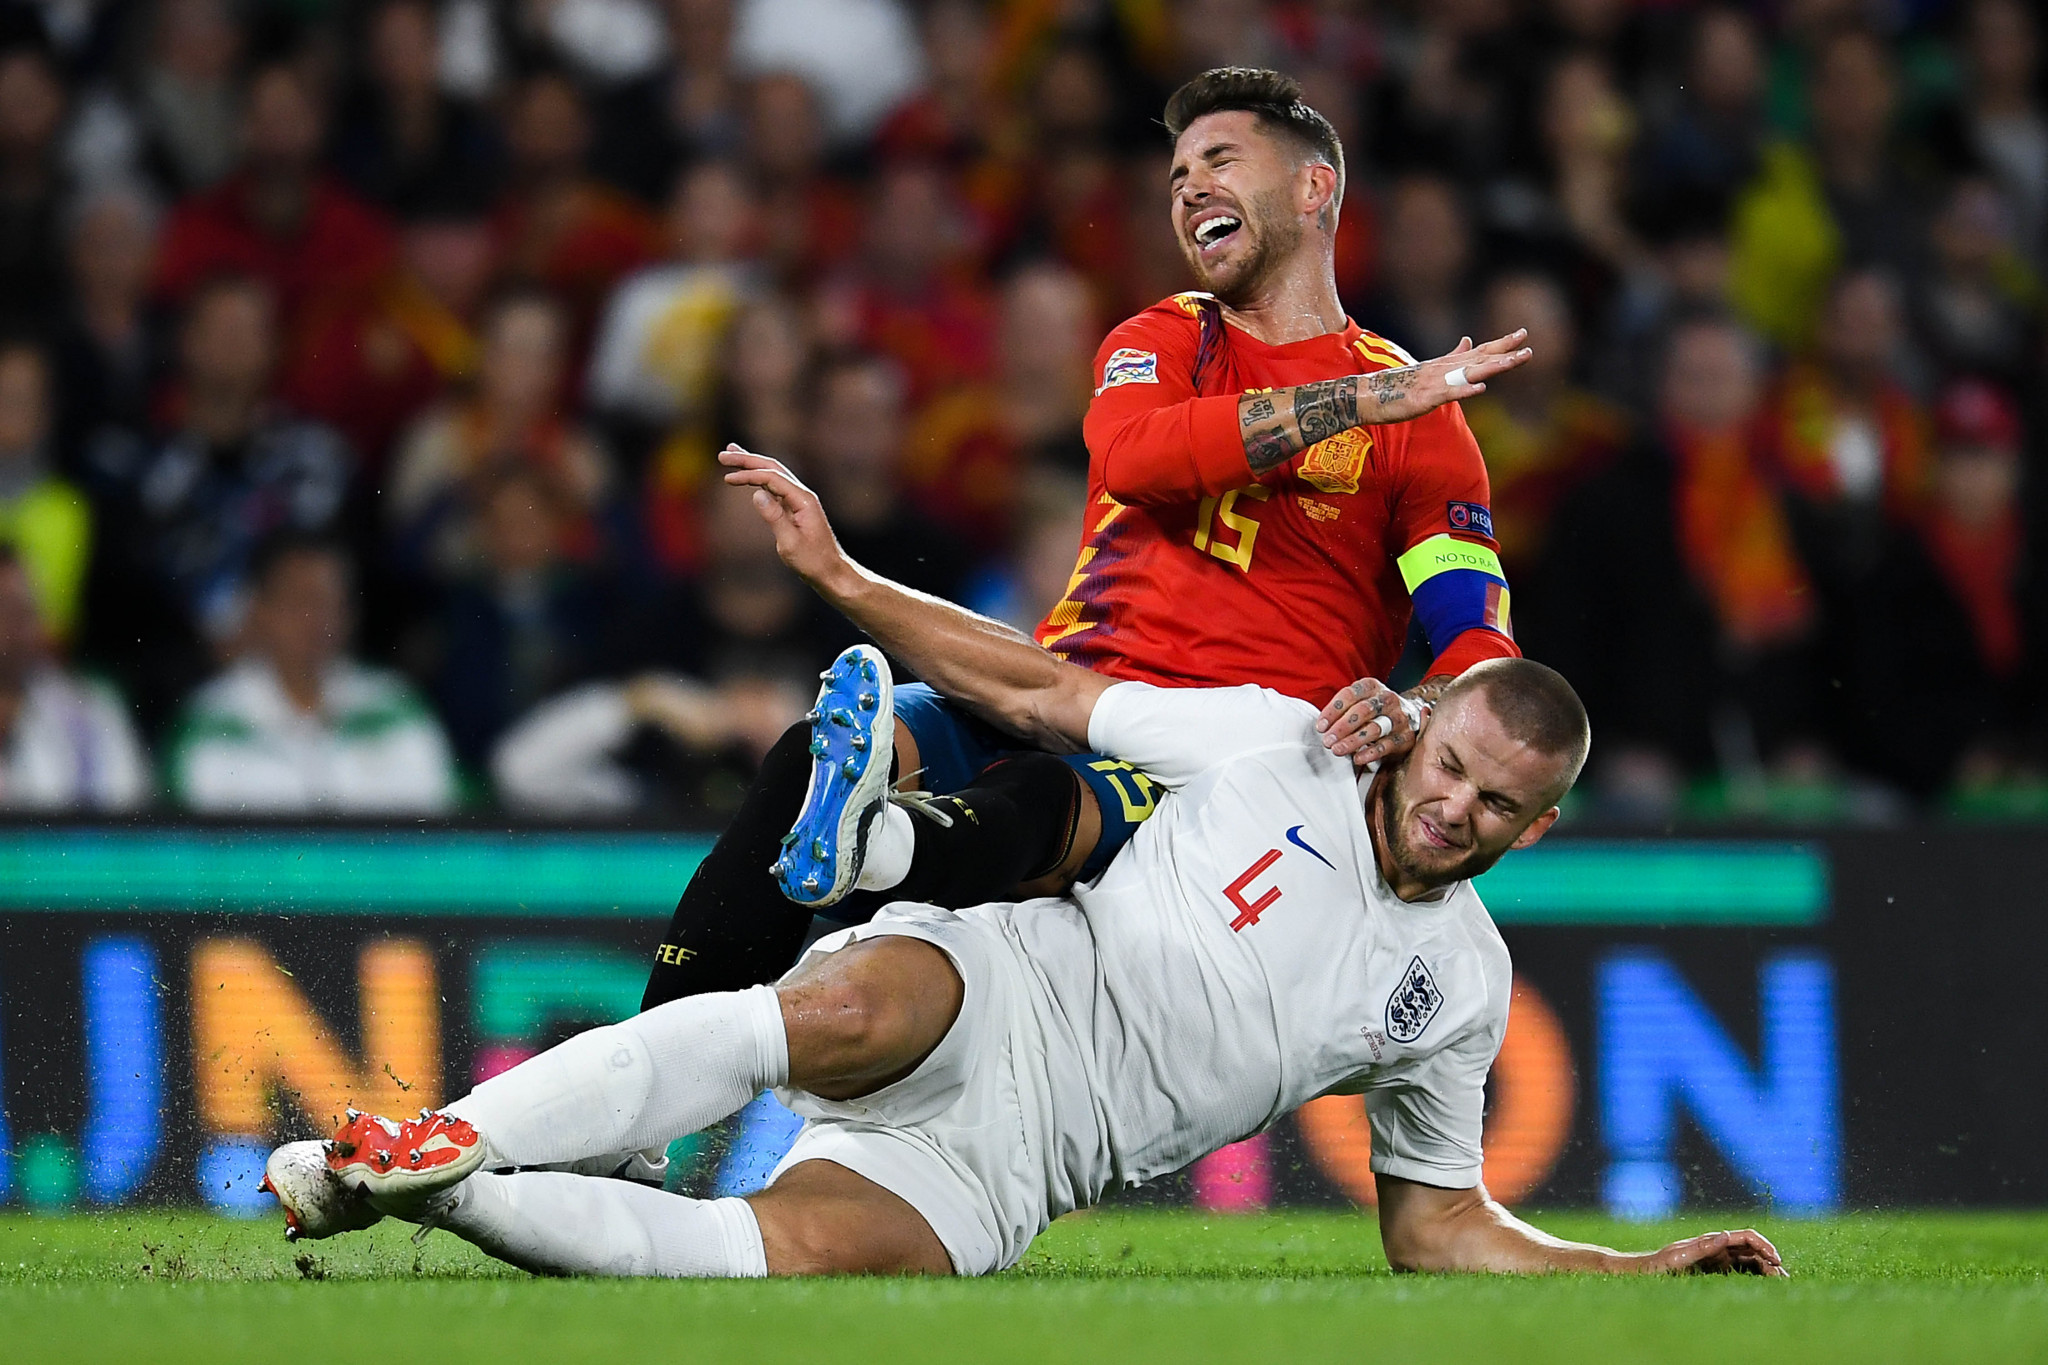 Eric Dier's tackle on Sergio Ramos highlighted the competitive nature of the Nations League games ©Getty Images